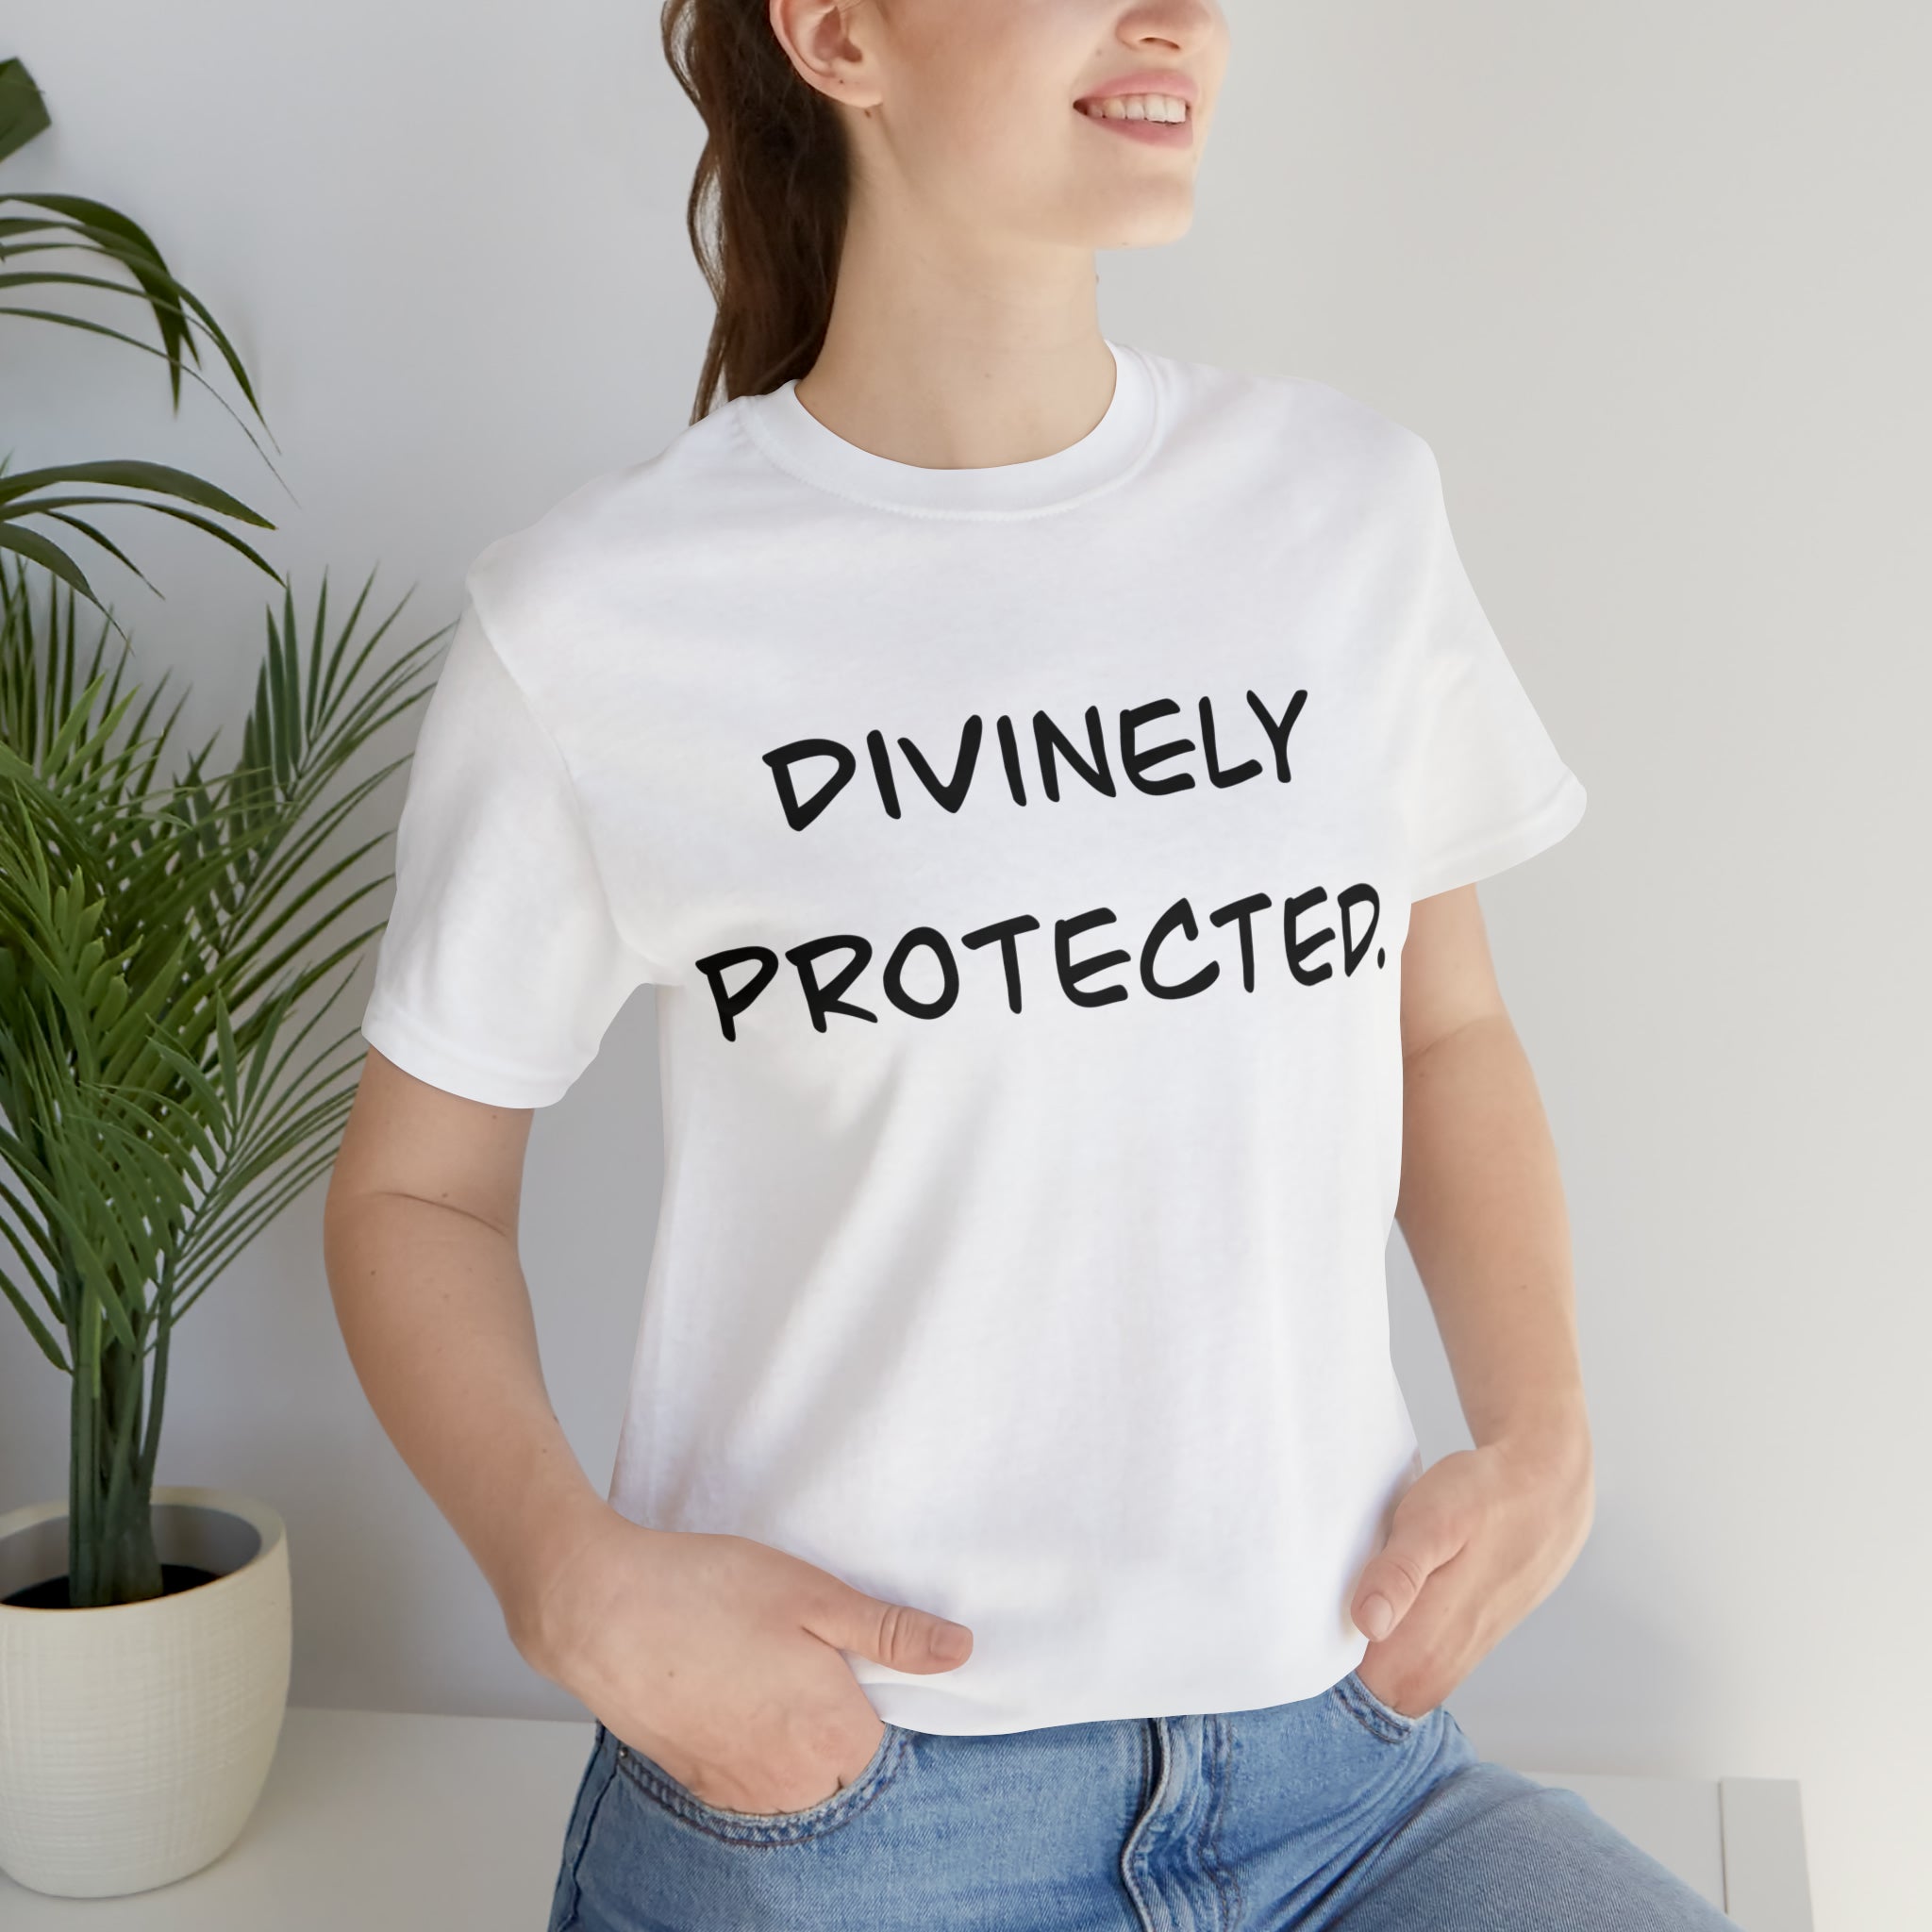 Divinely Protected Tee